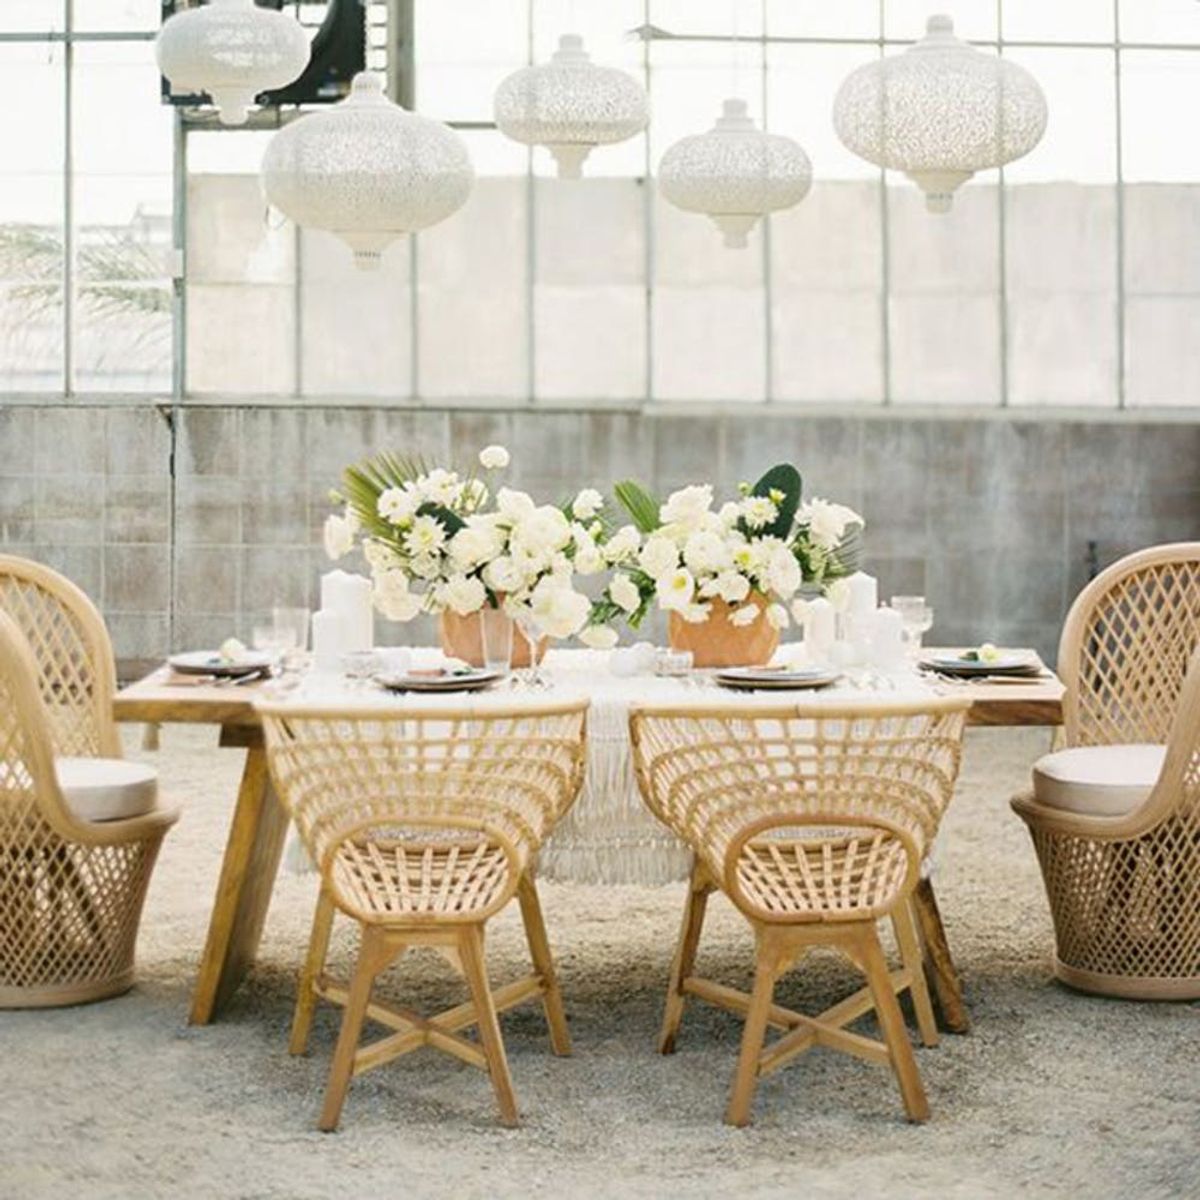 9 Rattan Wedding Decorations to Consider for Your Big Day